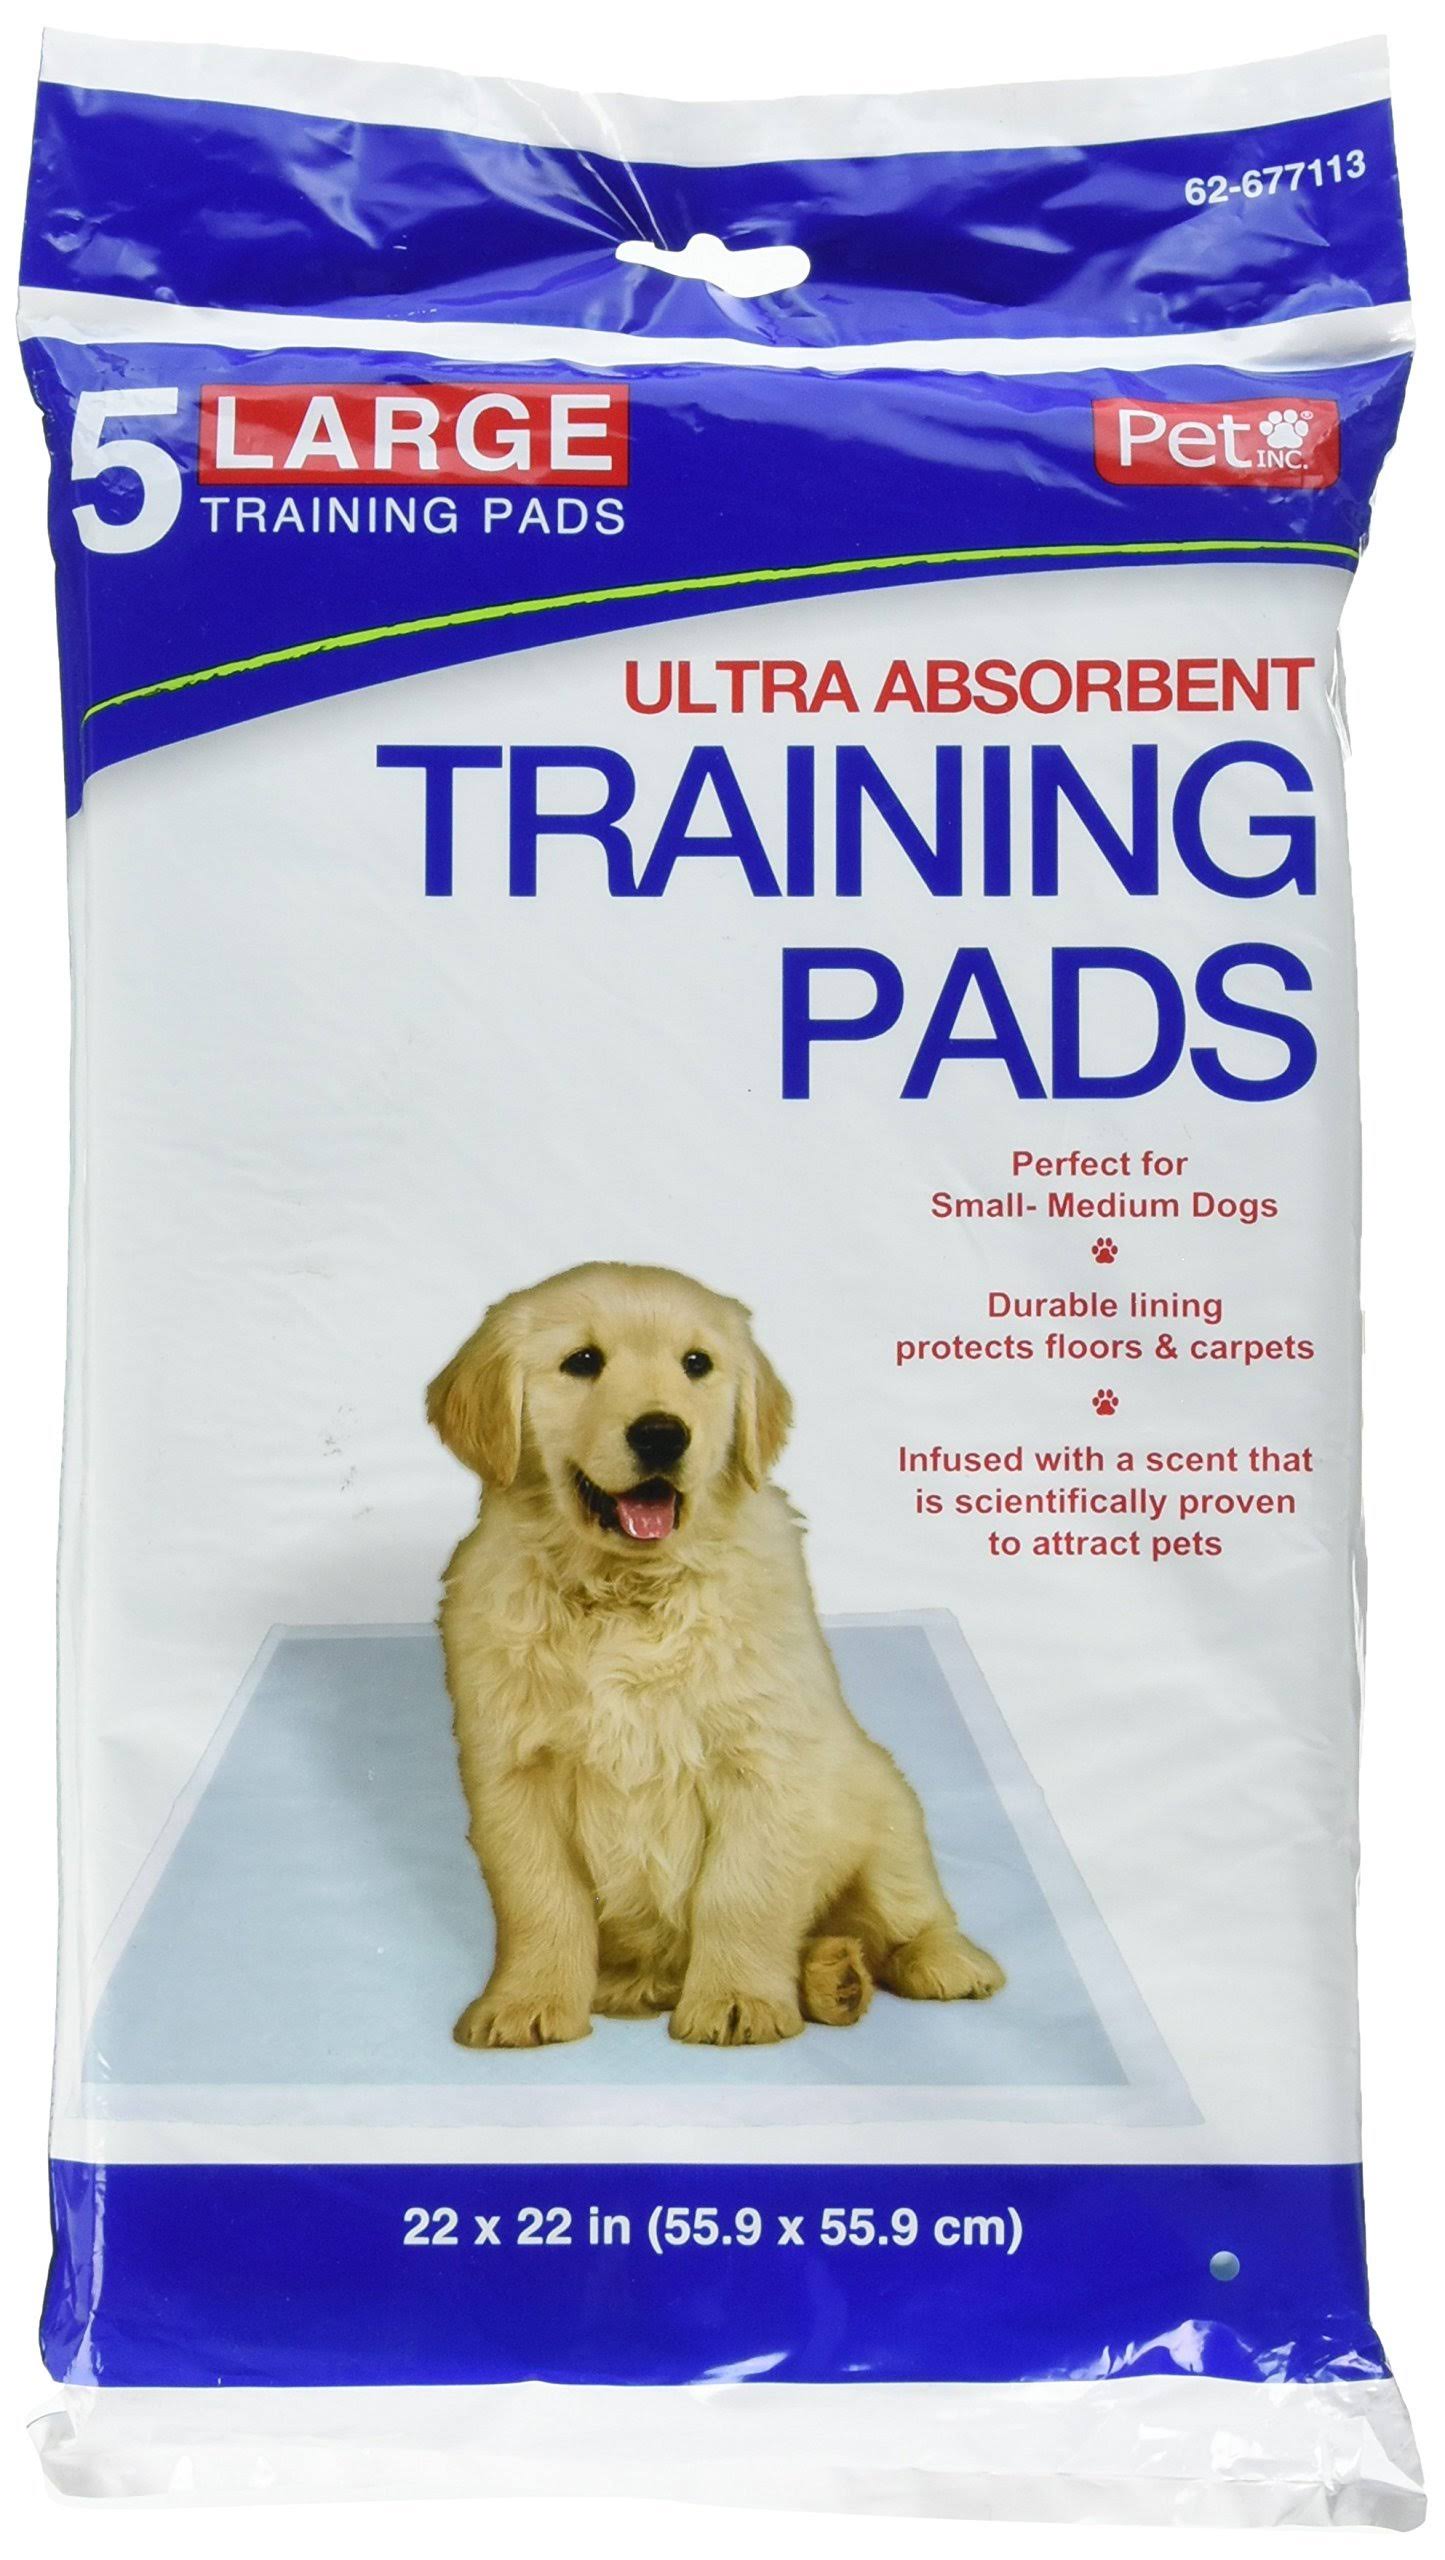 Large Ultra Absorbent Pet Training Pads (Total of 20 Pads) by Pet